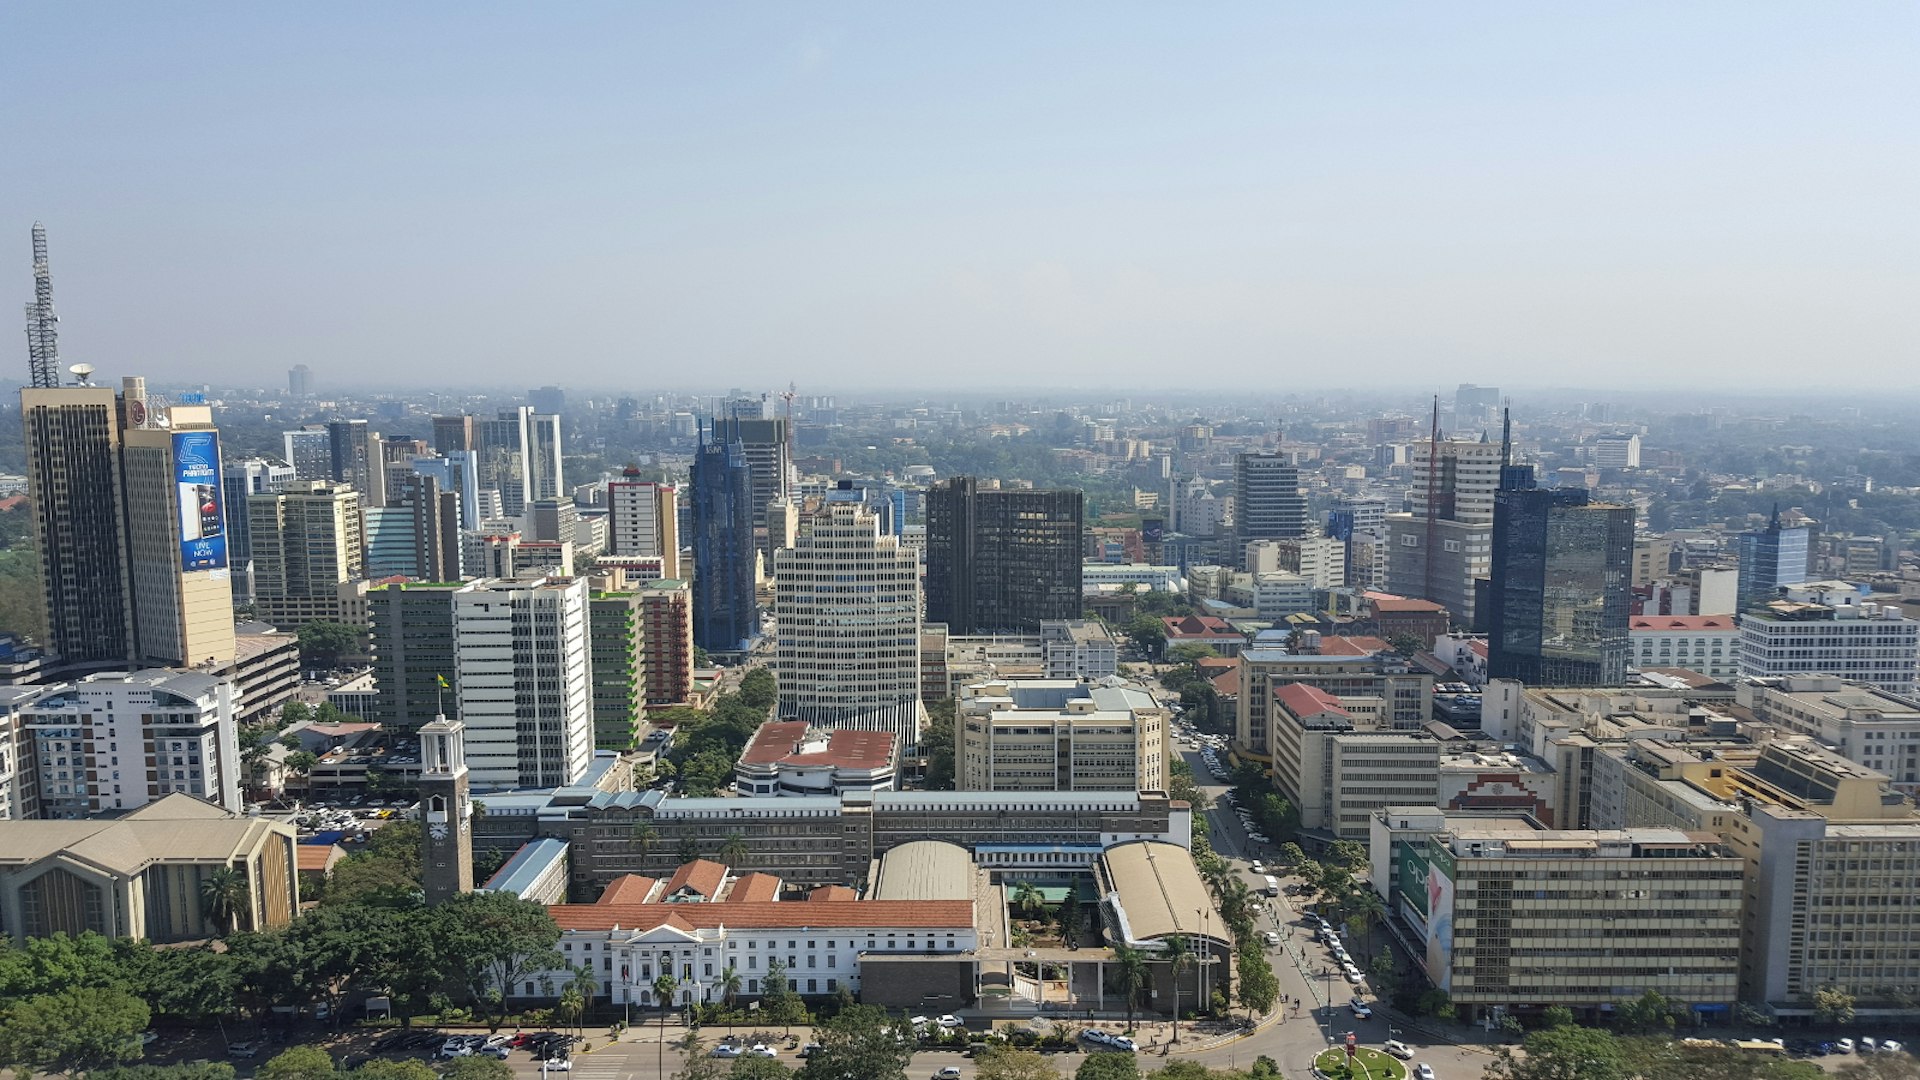 Beneath a blue sky sits the many tall buildings of central Nairobi, as seen from the lofty vista on the helicopter pad of the Kenya International Convention Centre © Clementine Logan / Lonely Planet